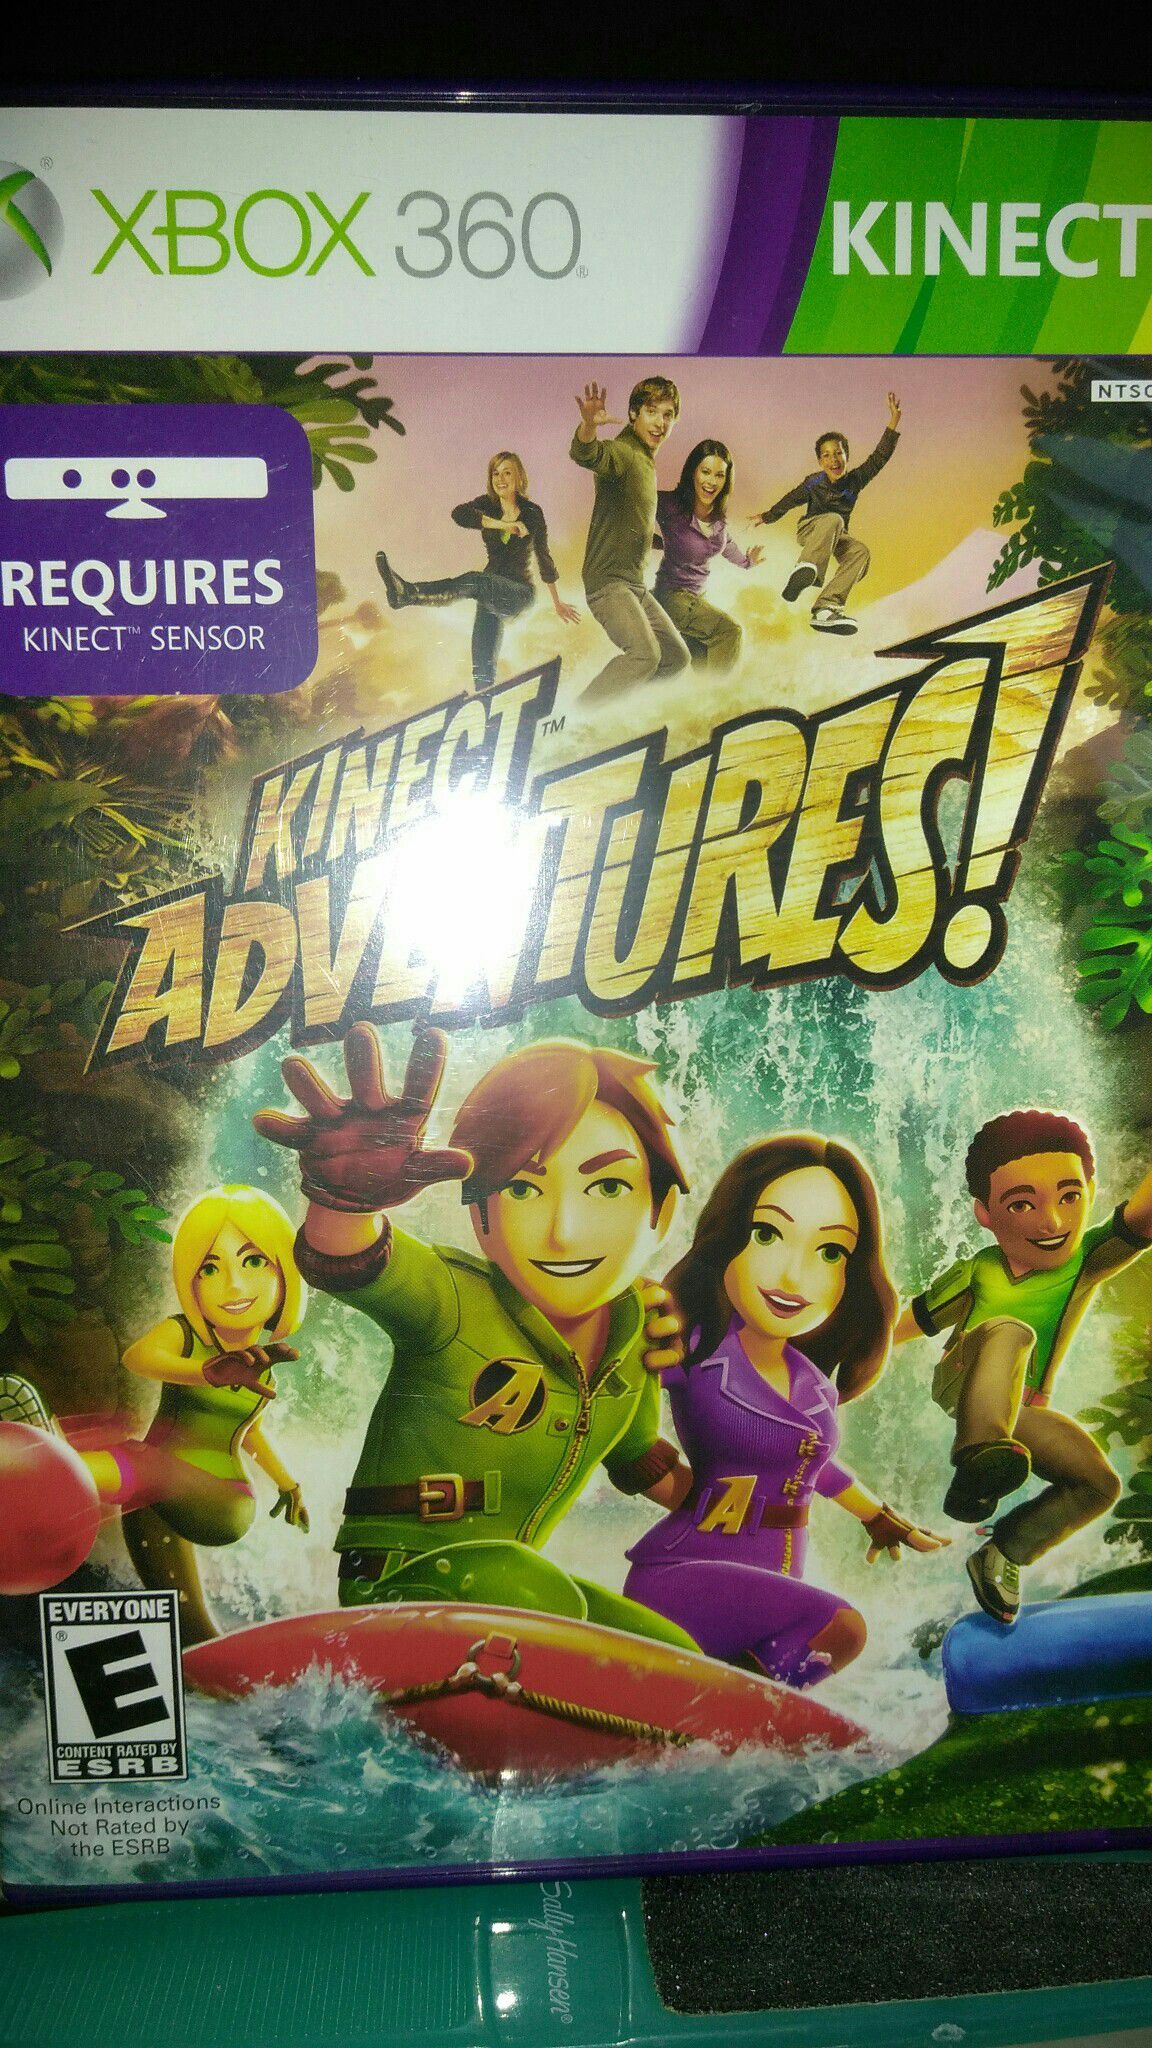 KINECT ADVENTURES GAME FOR XBOX 360, REQUIRES KINECT MOTION SENSOR